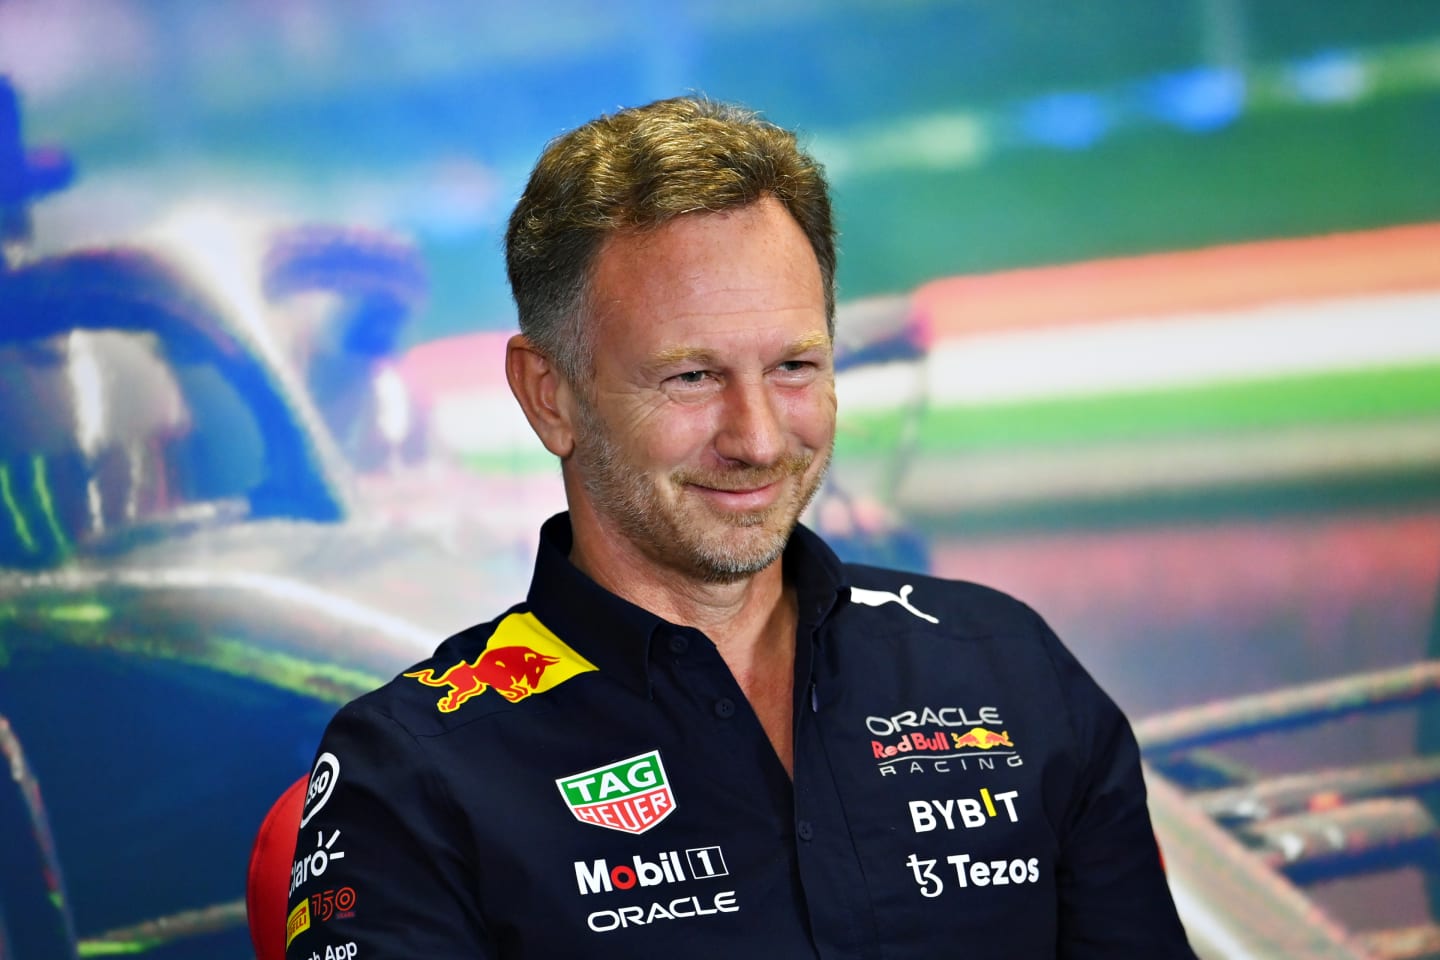 BUDAPEST, HUNGARY - JULY 30: Red Bull Racing Team Principal Christian Horner attends the Team Principals Press Conference prior to final practice ahead of the F1 Grand Prix of Hungary at Hungaroring on July 30, 2022 in Budapest, Hungary. (Photo by Dan Mullan/Getty Images)